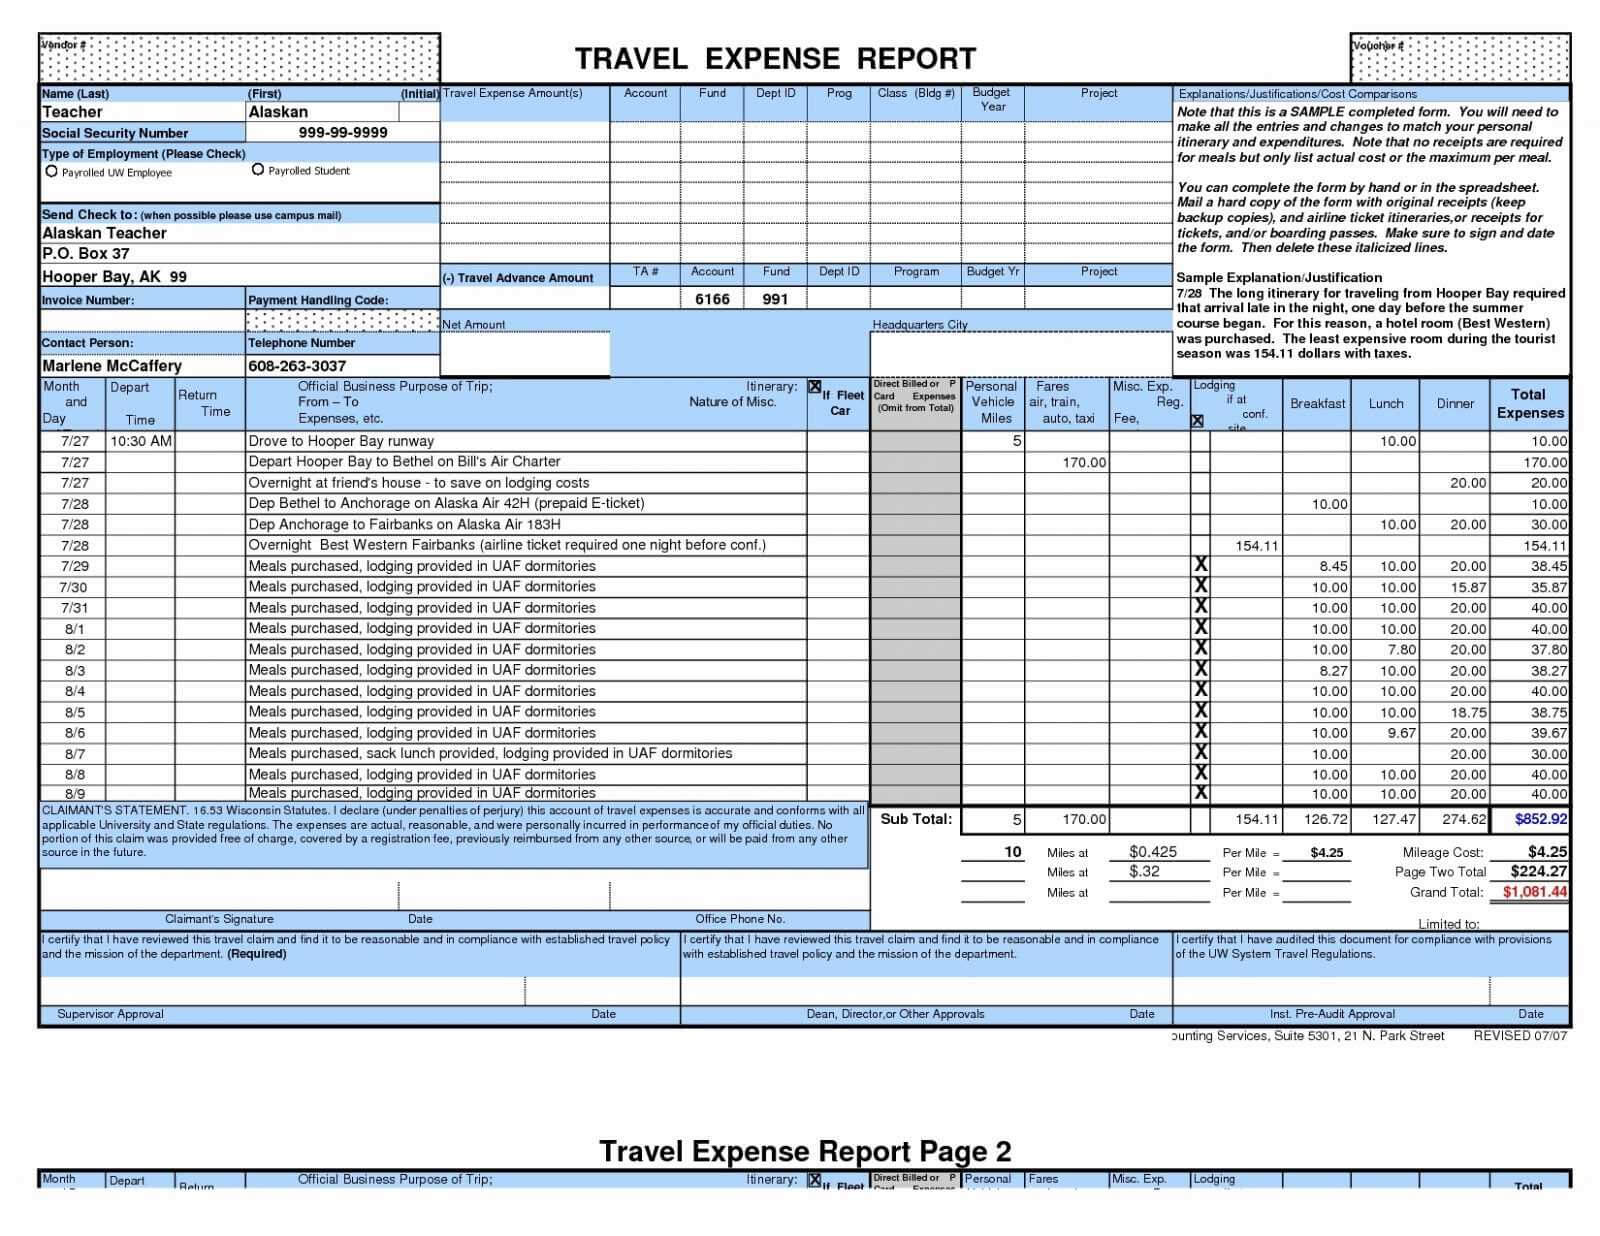 Reporting Requirements Template Excel Spreadsheet Intended For Reporting Requirements Template